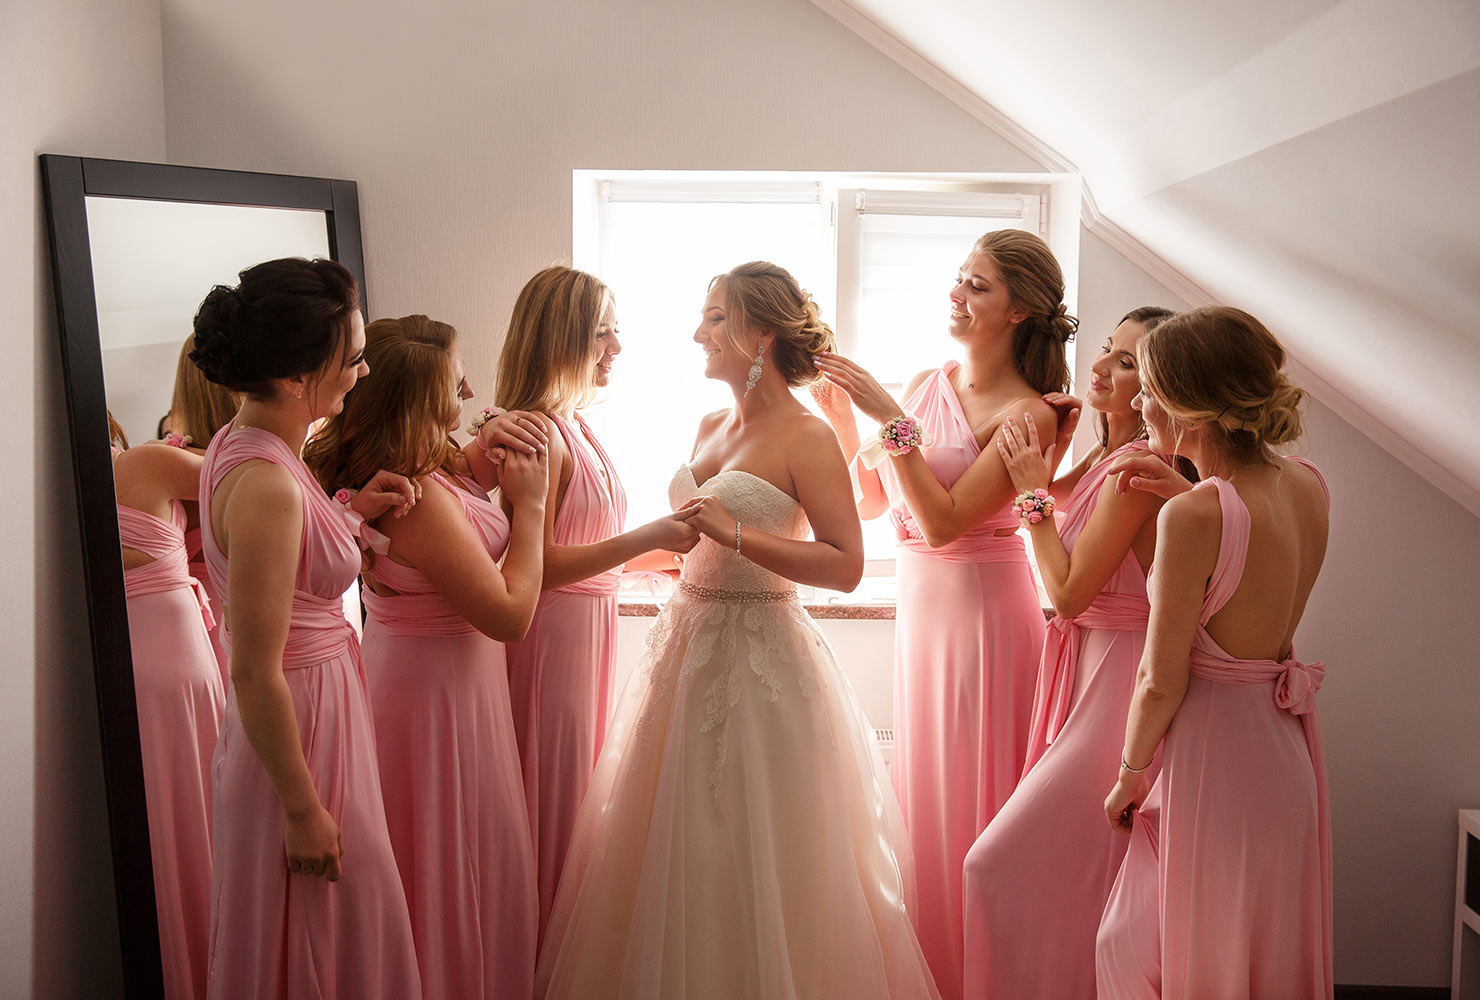 Bride surrounded by bridesmaids in pink dresses.